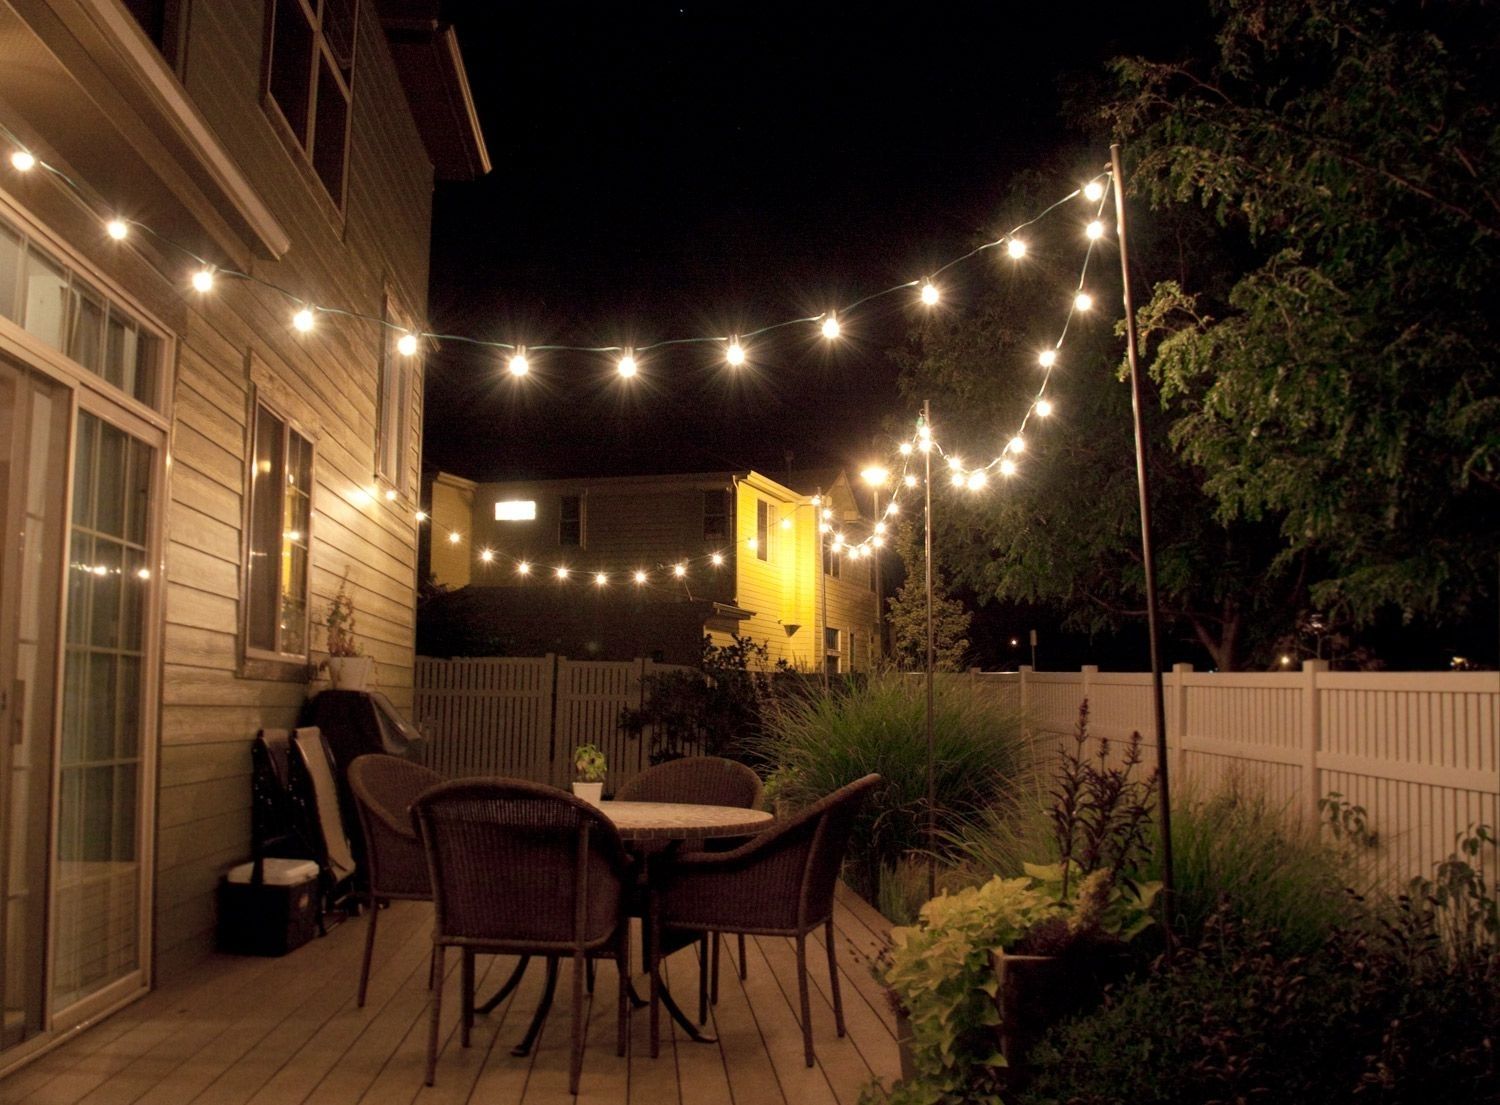 How To Make Inexpensive Poles To Hang String Lights On – Café Style With Regard To Hanging Outdoor Lights On Deck (Photo 2 of 15)